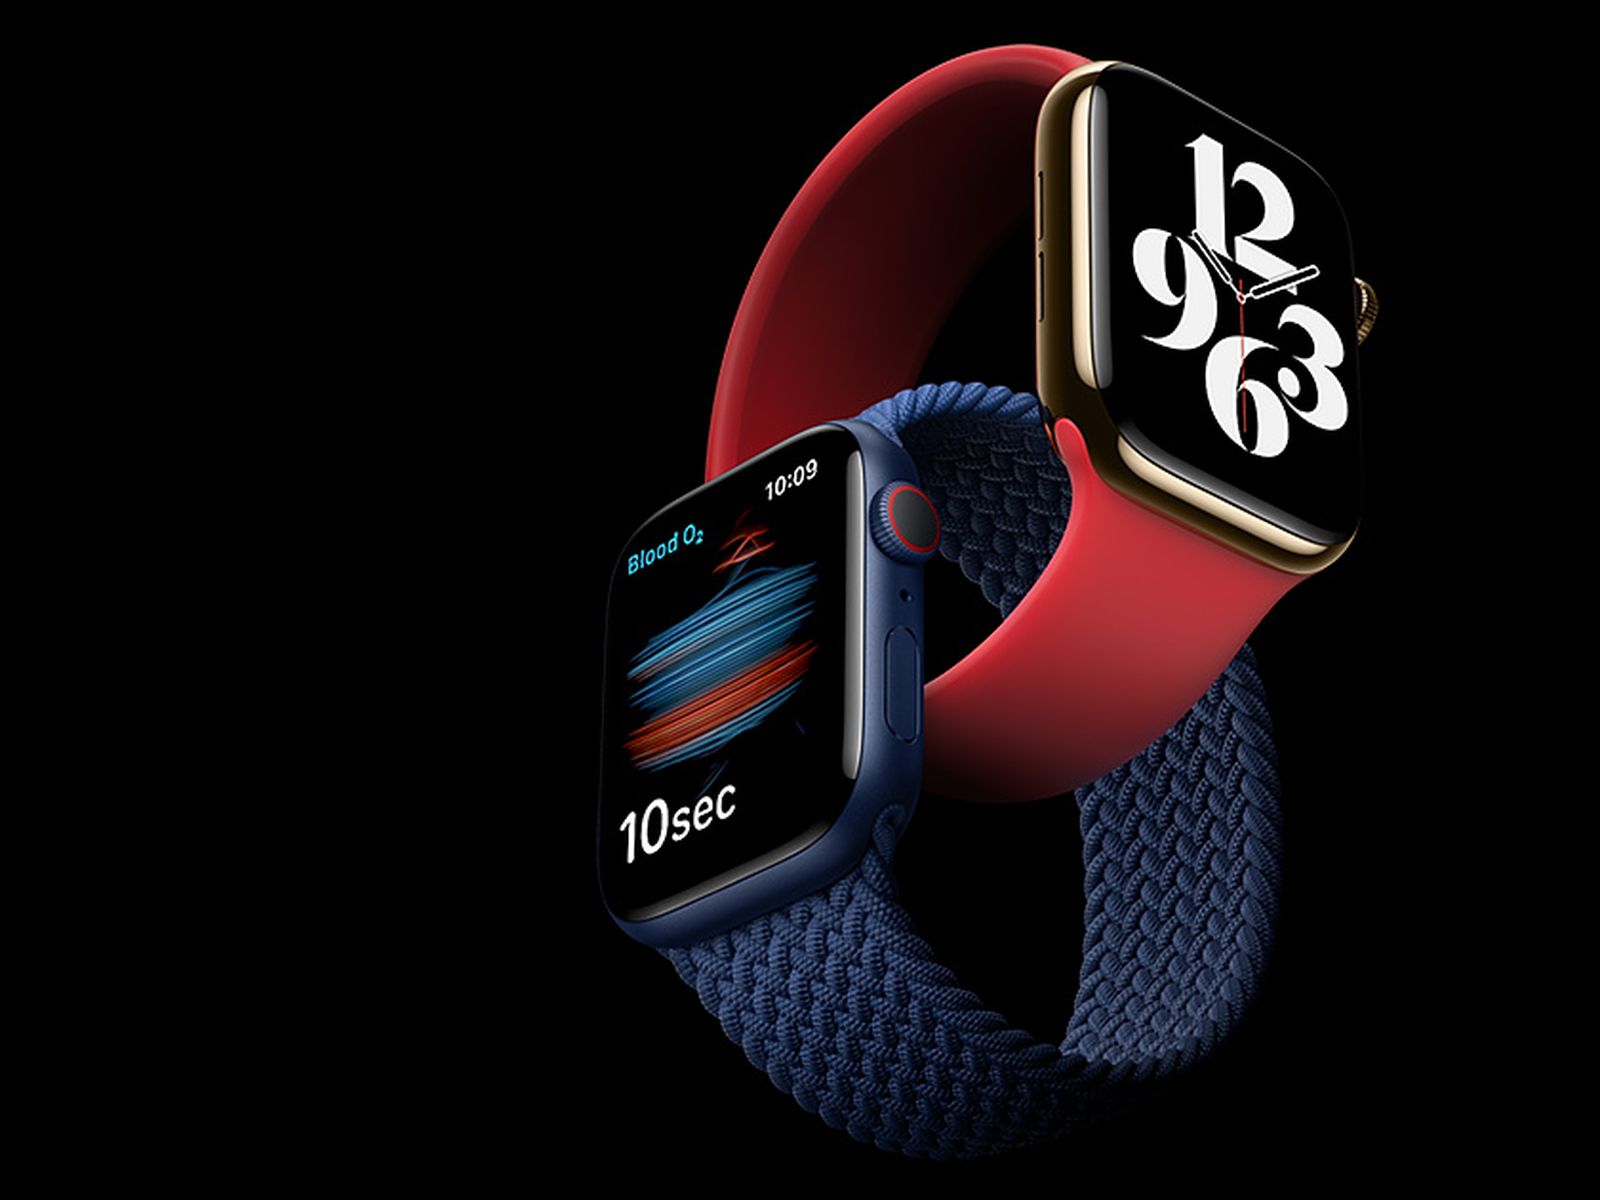 Apple Held Top in Global Smartwatch Market in Q4 2020, Shipping 13 Million Apple Watch Series 6 and SE Models - MacRumors